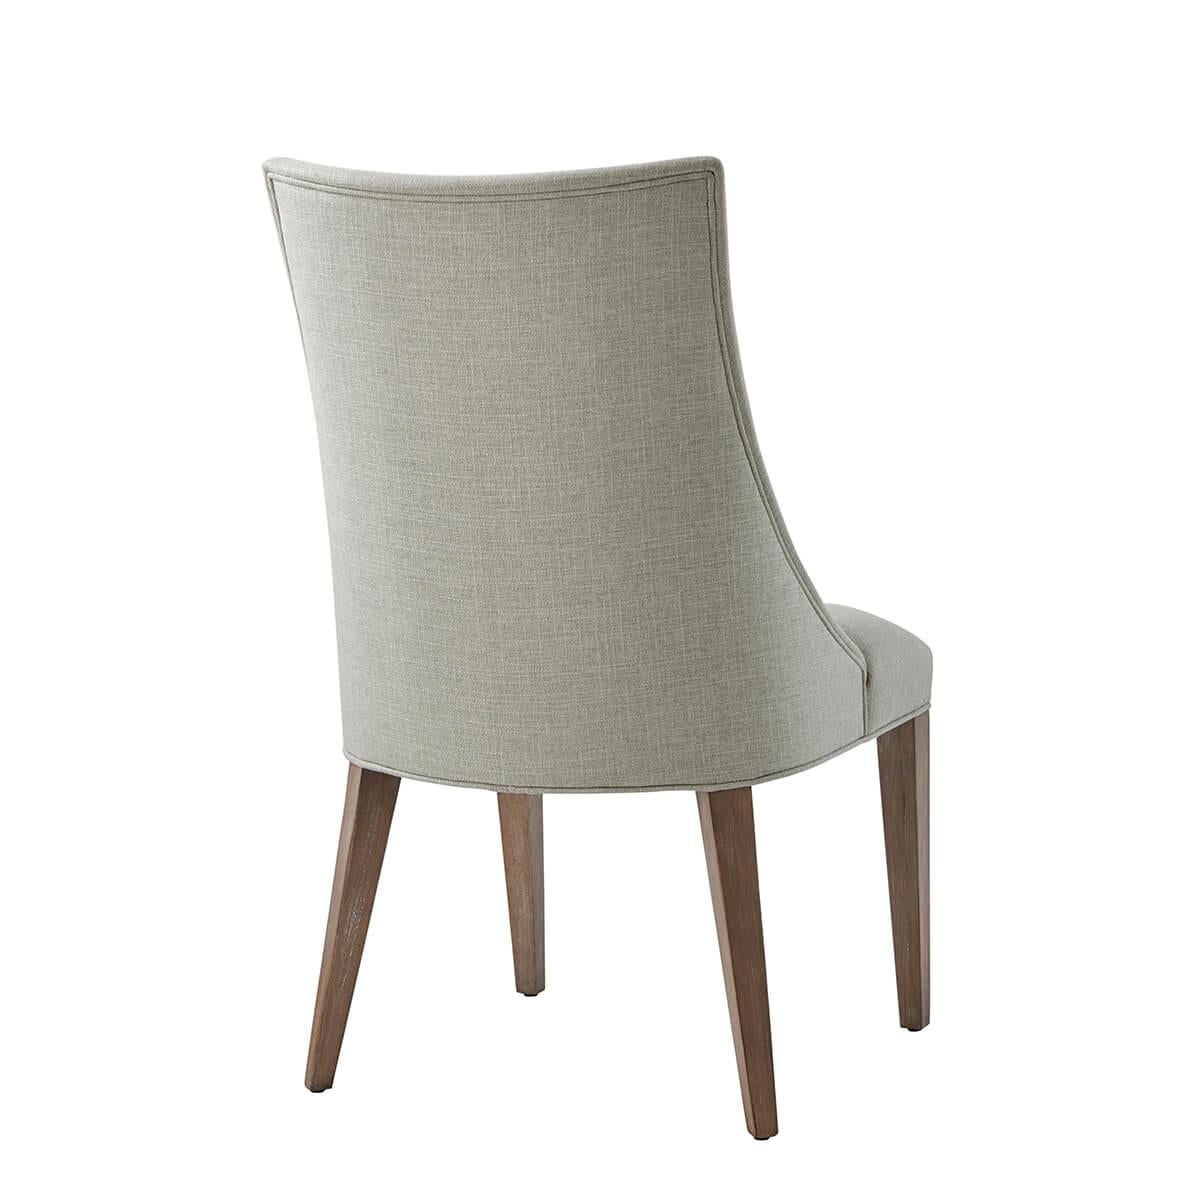 With an upholstered back, arm, and tight seat cushion, in the Draper performance fabric, with traditional square tapered legs in our light mangrove finish. 

Dimensions: 21